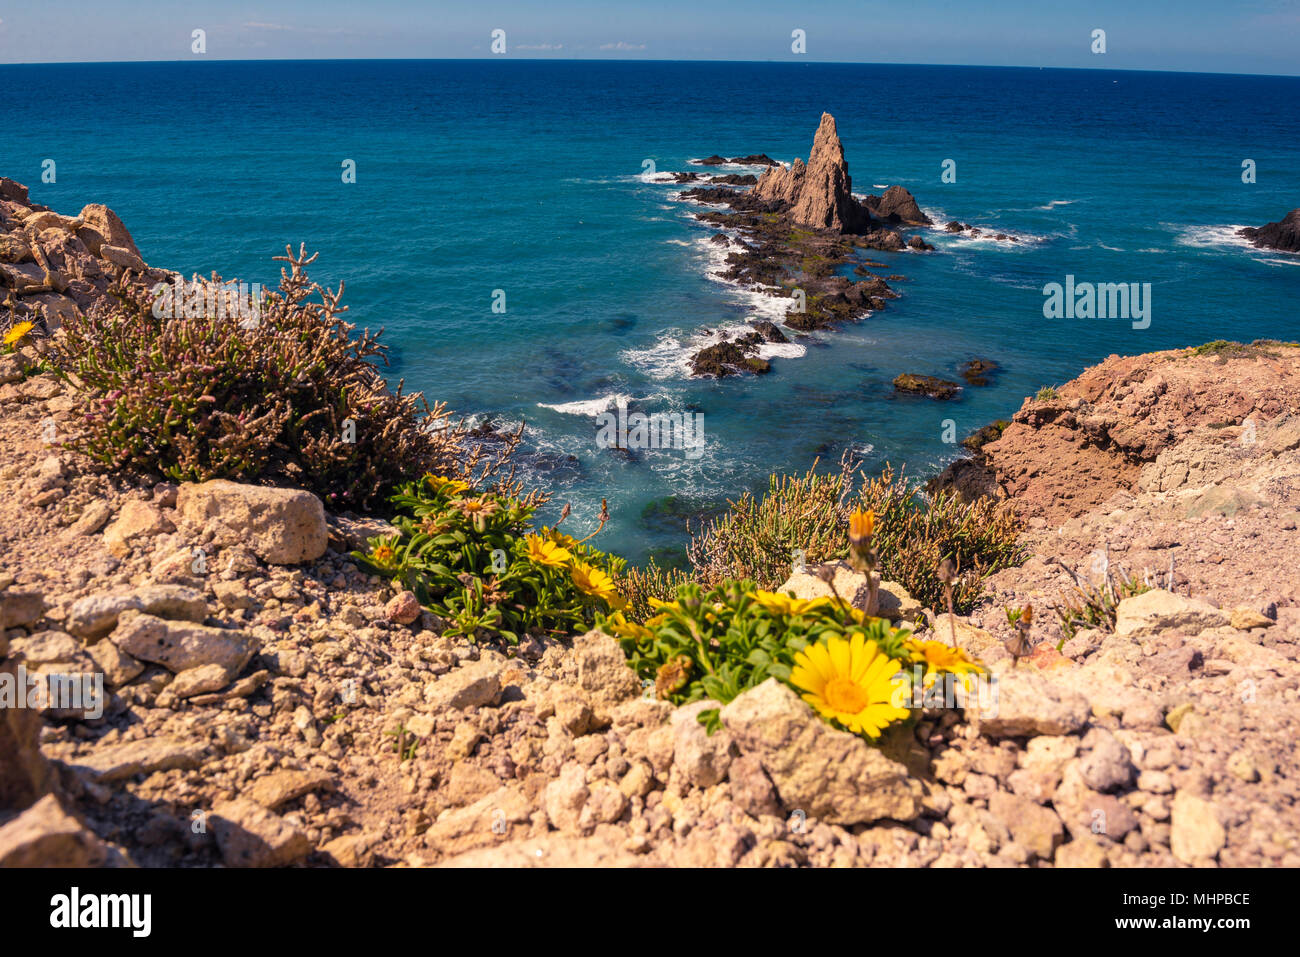 Reef of 'Las Sirenas', located in Cabo de Gata, Almería, Spain. A spectacular place to relax and photograph. Stock Photo